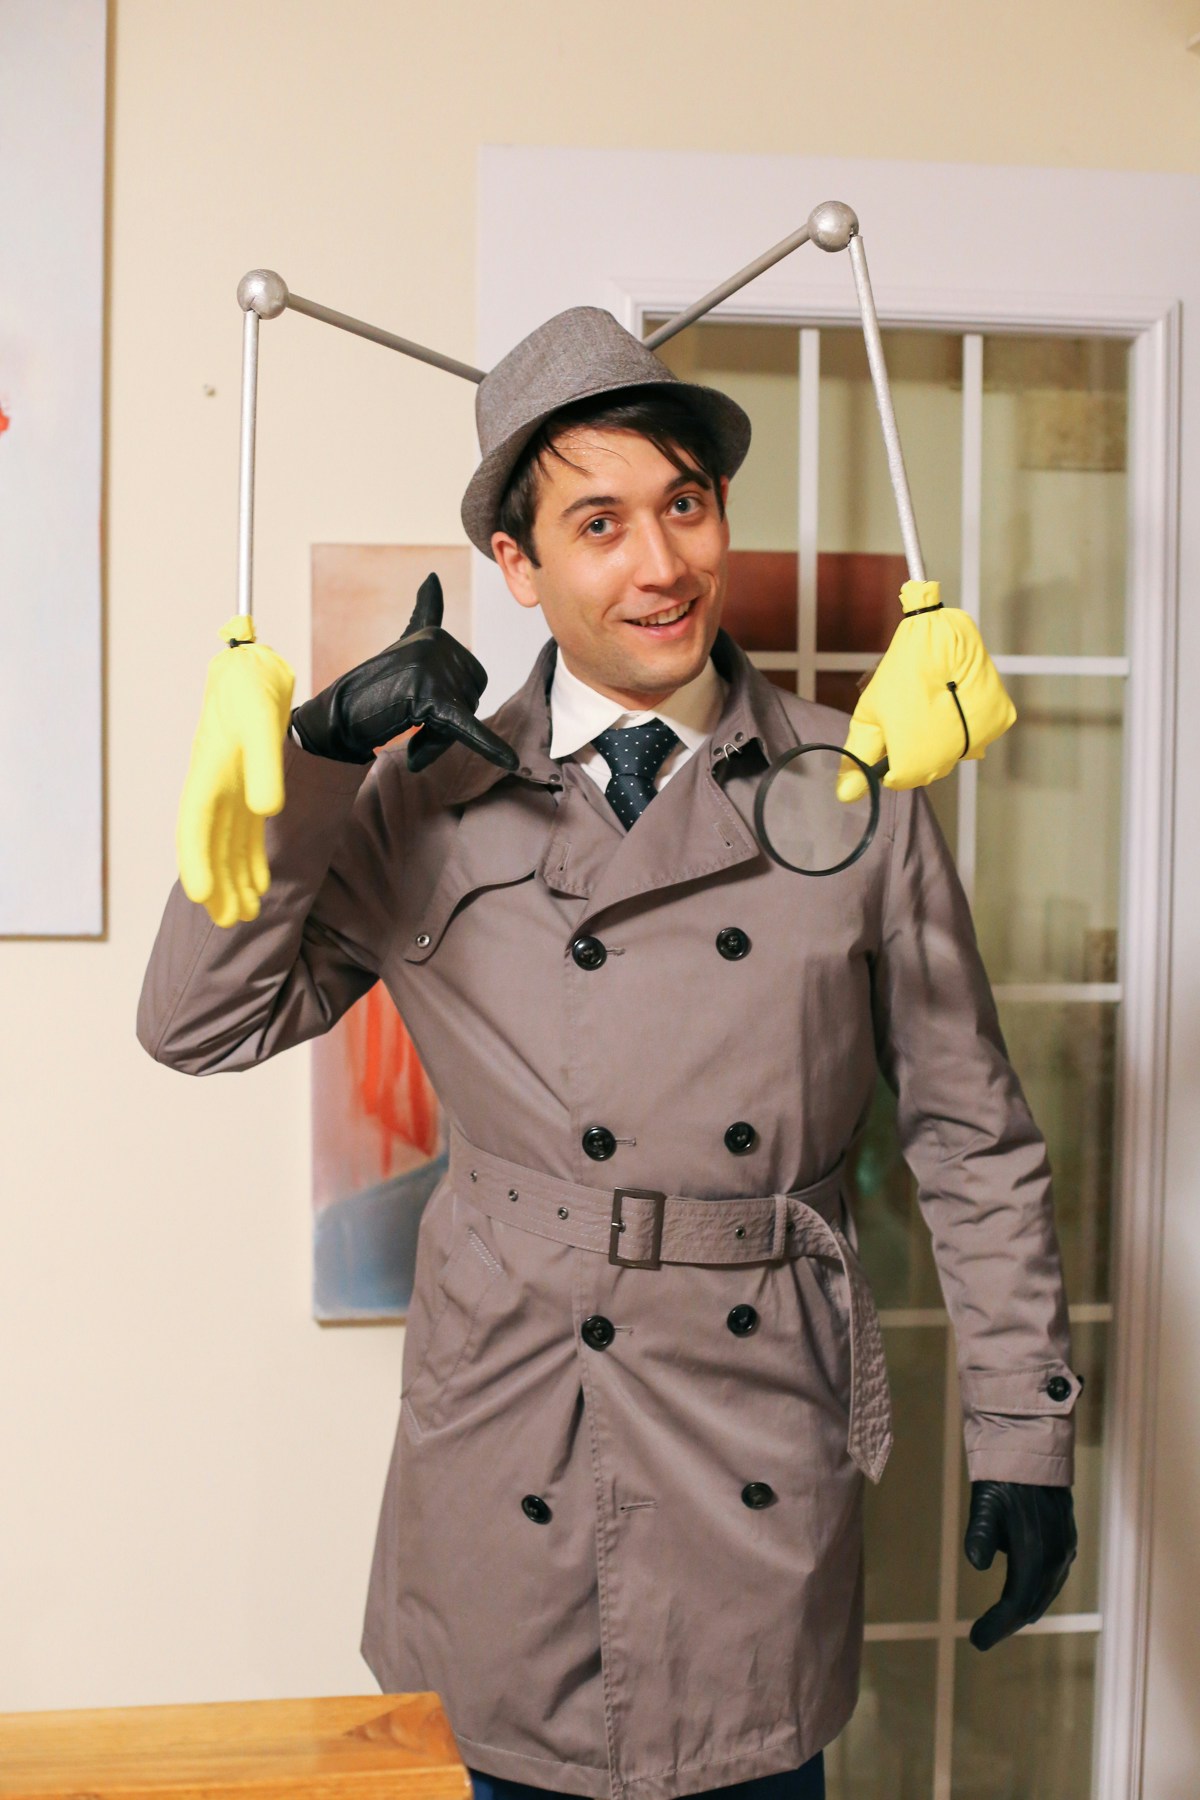 Inspector Gadget DIY Halloween Costume: to make this Inspector Gadget hat you need a fedora, wooden dowels, styrofoam balls, a magnifying glass and rubber gloves.